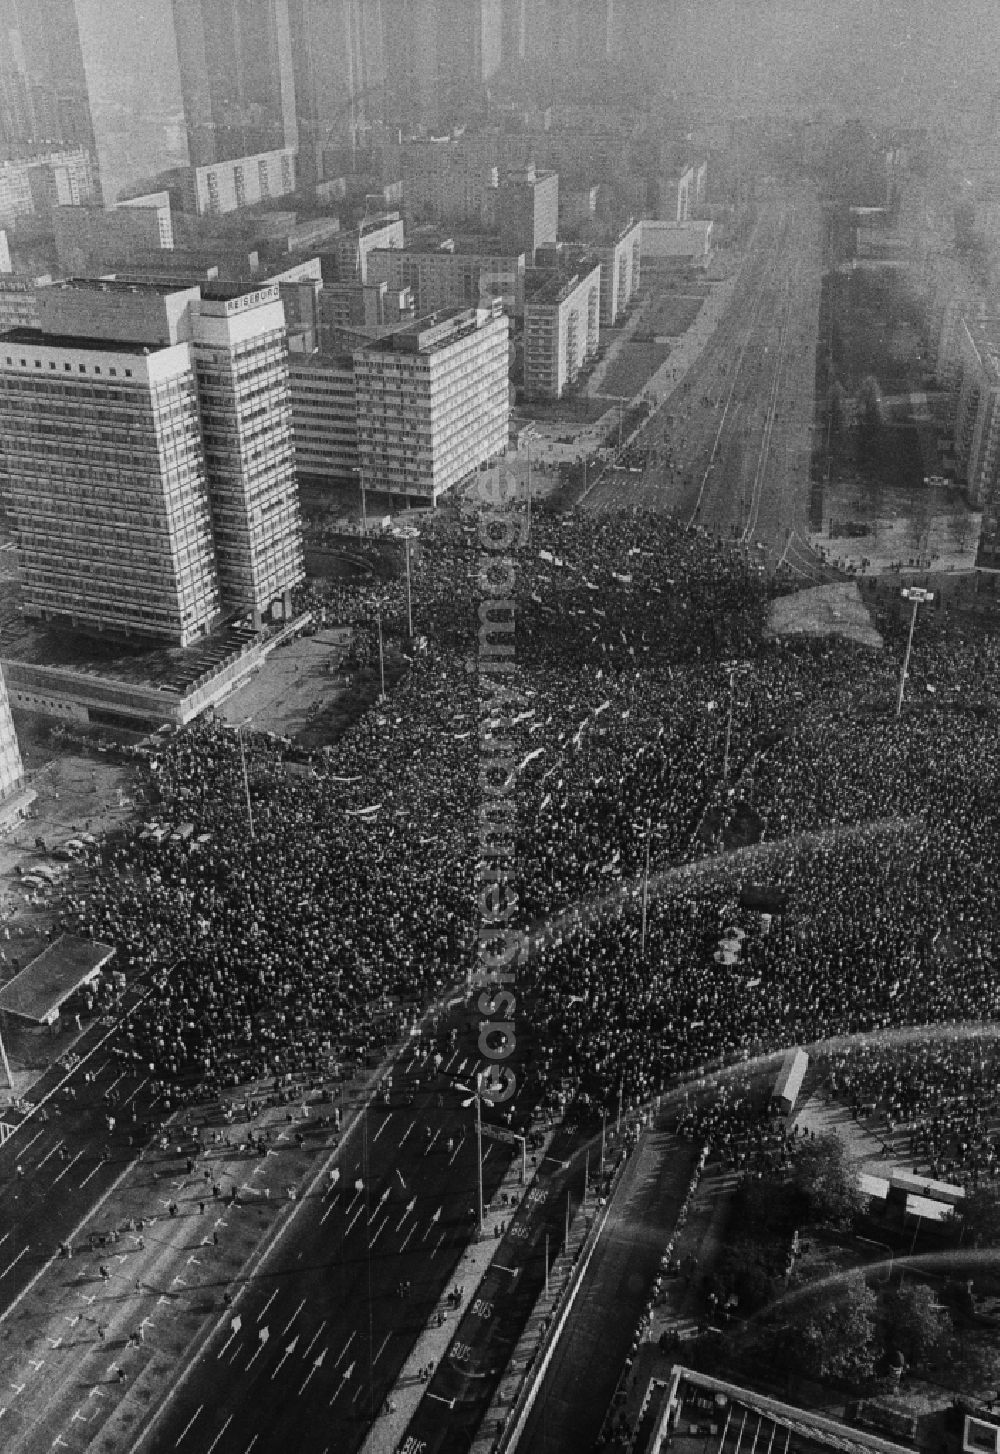 GDR picture archive: Berlin - Great demonstration of tens of thousands of East Germans at the Alexanderplatz in Berlin-the capital of East Germany